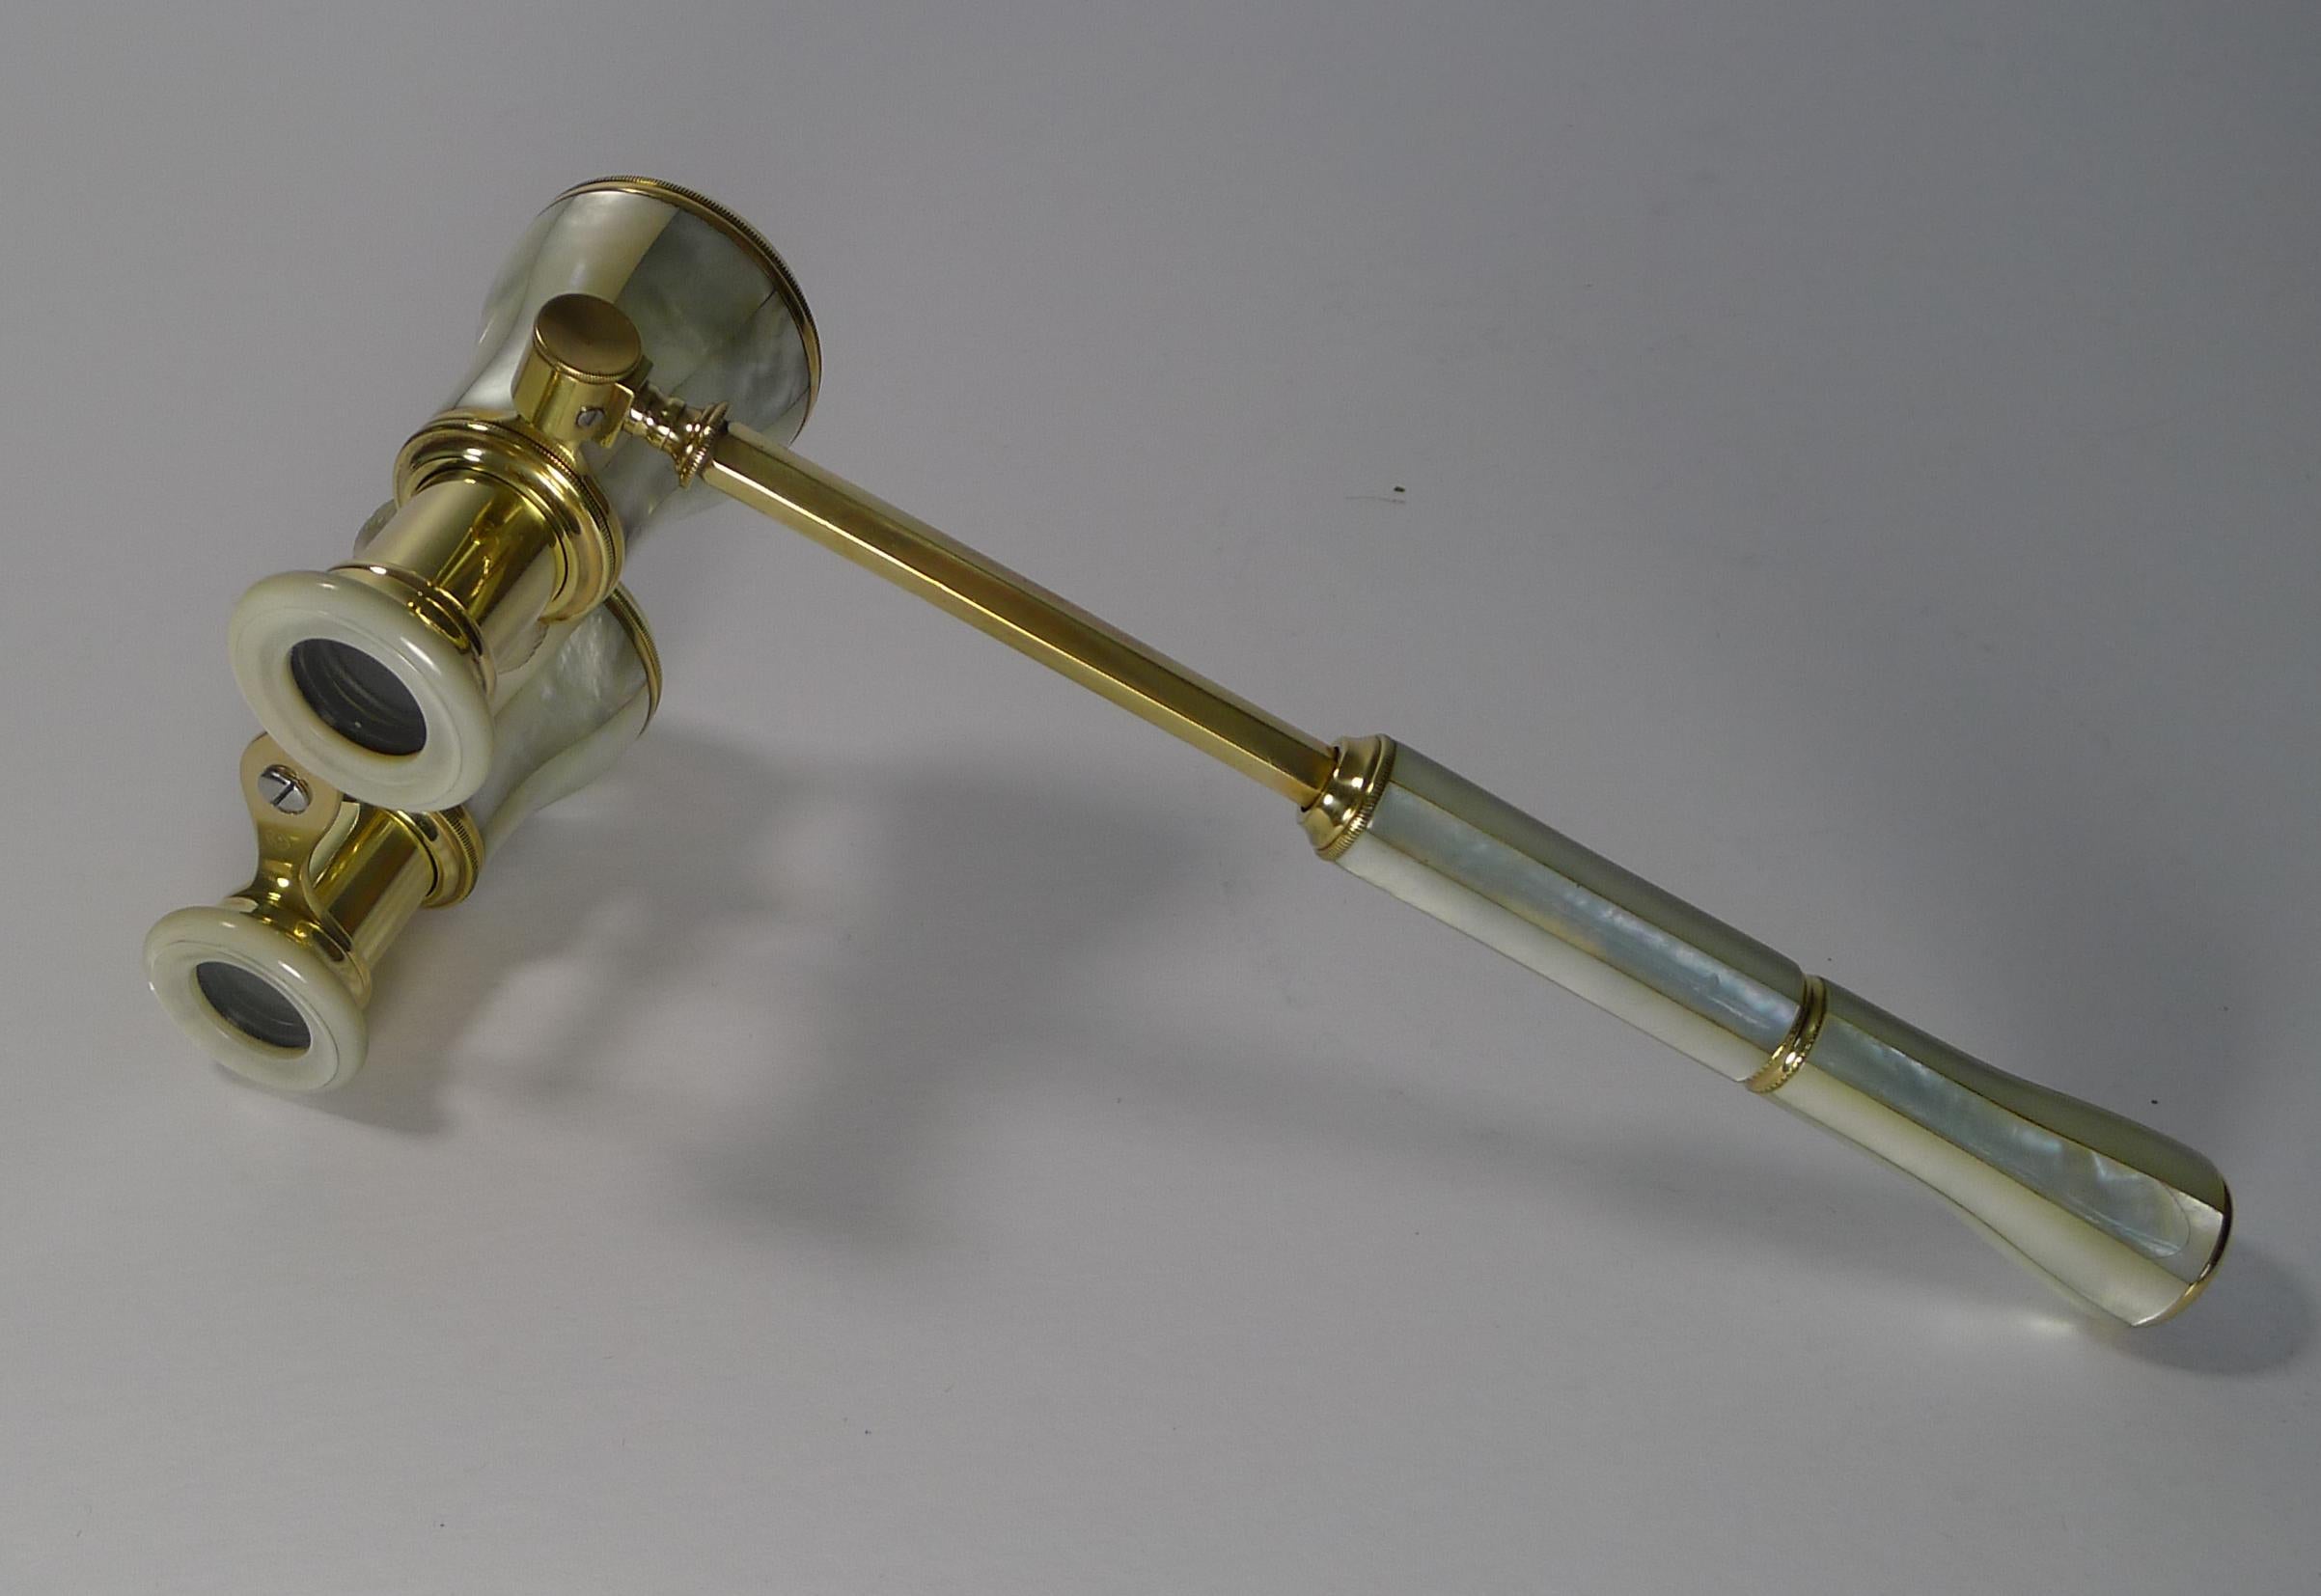 Edwardian Antique French Opera Glasses with Detachable Lorgnette Handle, circa 1900